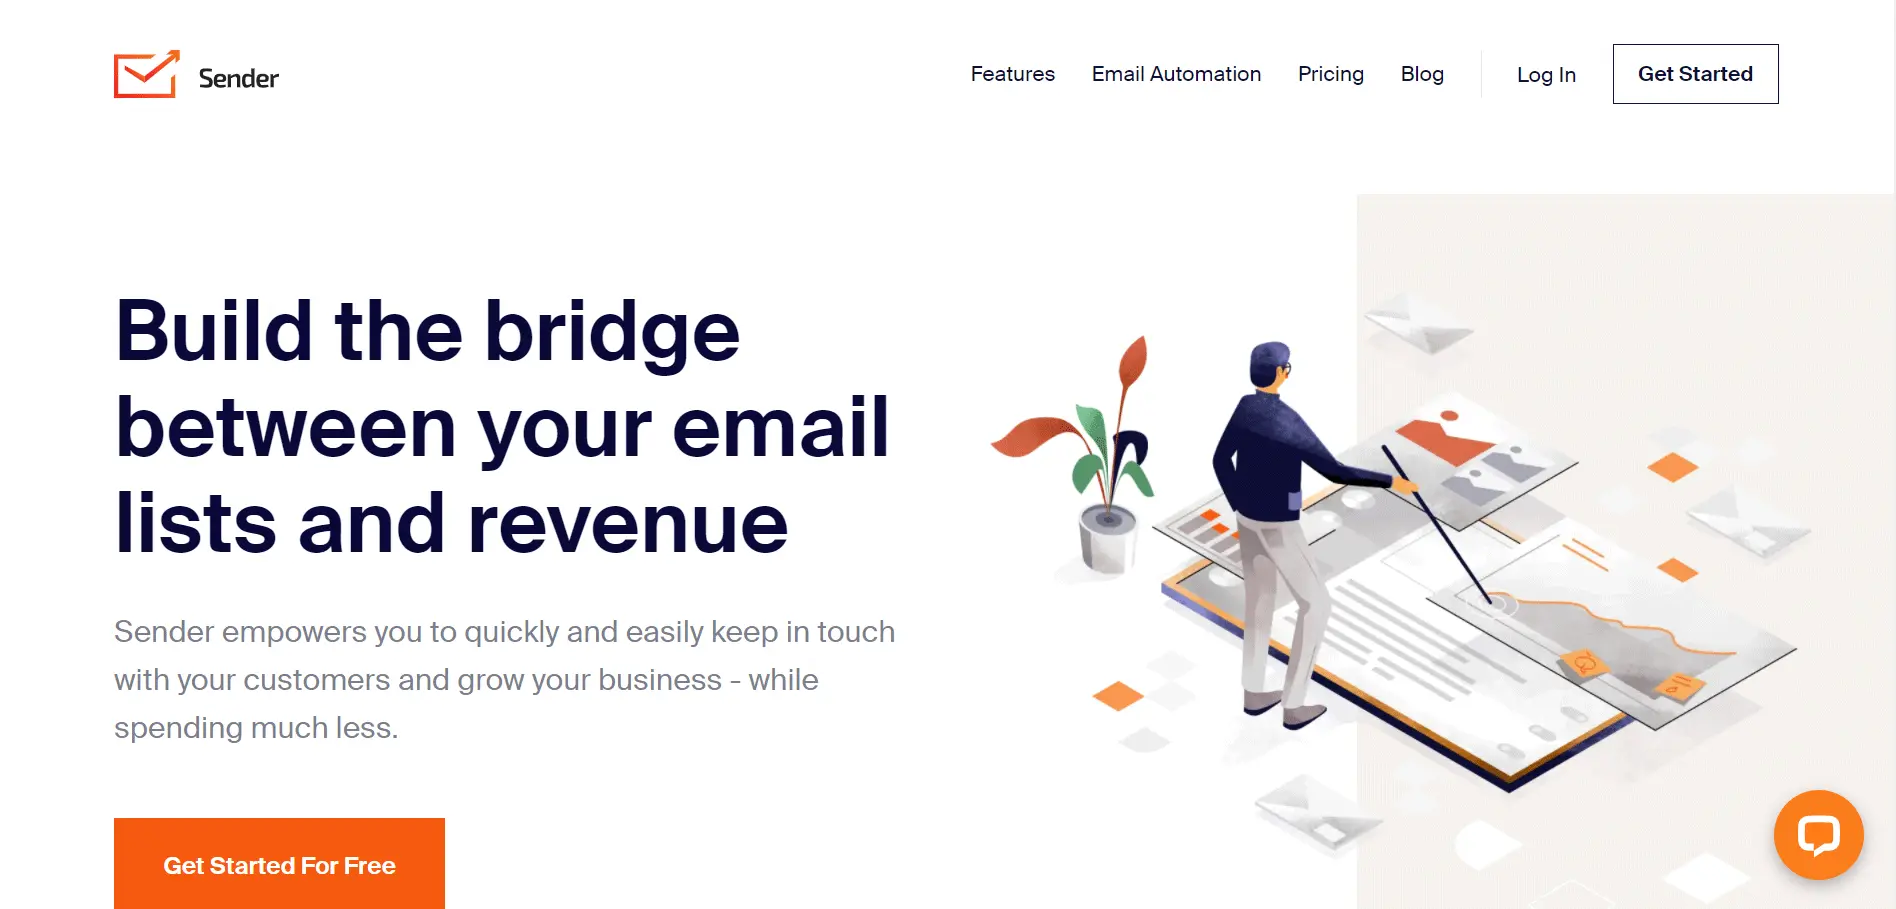 This is the screenshot of the sender.net website. It offers email automation services and is loaded with abundant features to help marketers reach their target audience